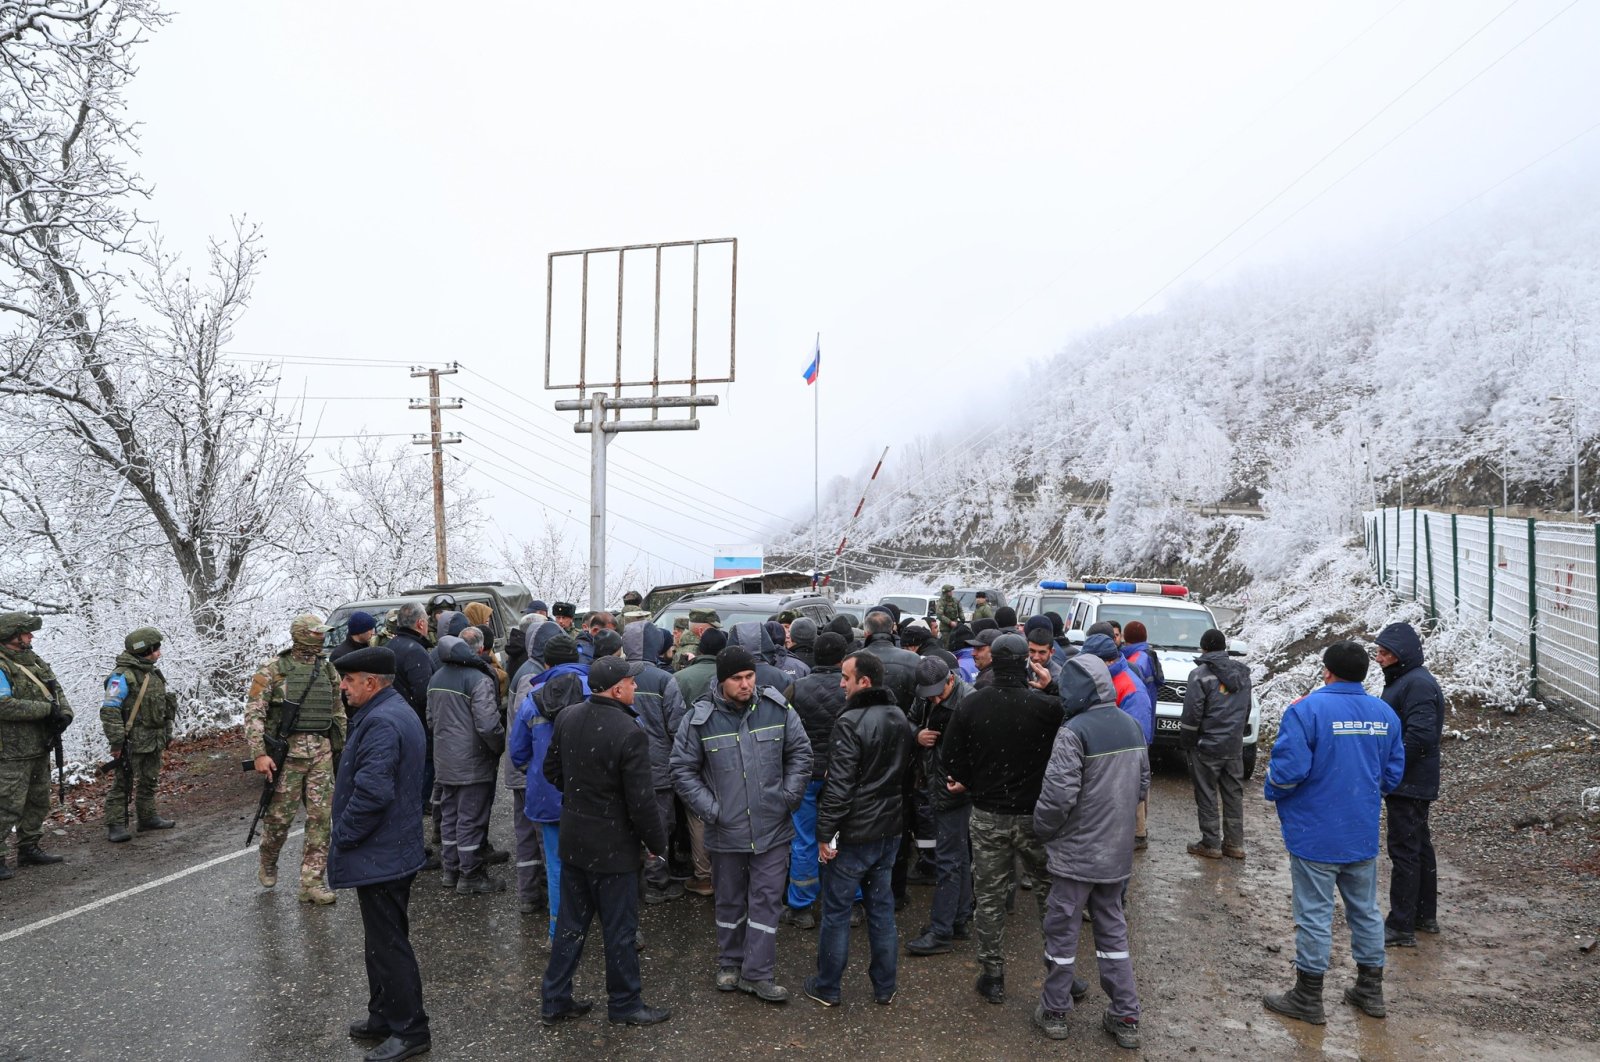 A group of Azerbaijani experts arrive in the Karabakh region housing Armenians and Russian peacekeepers to investigate alleged illegal mining activities on Dec. 3, 2022. (AA Photo)